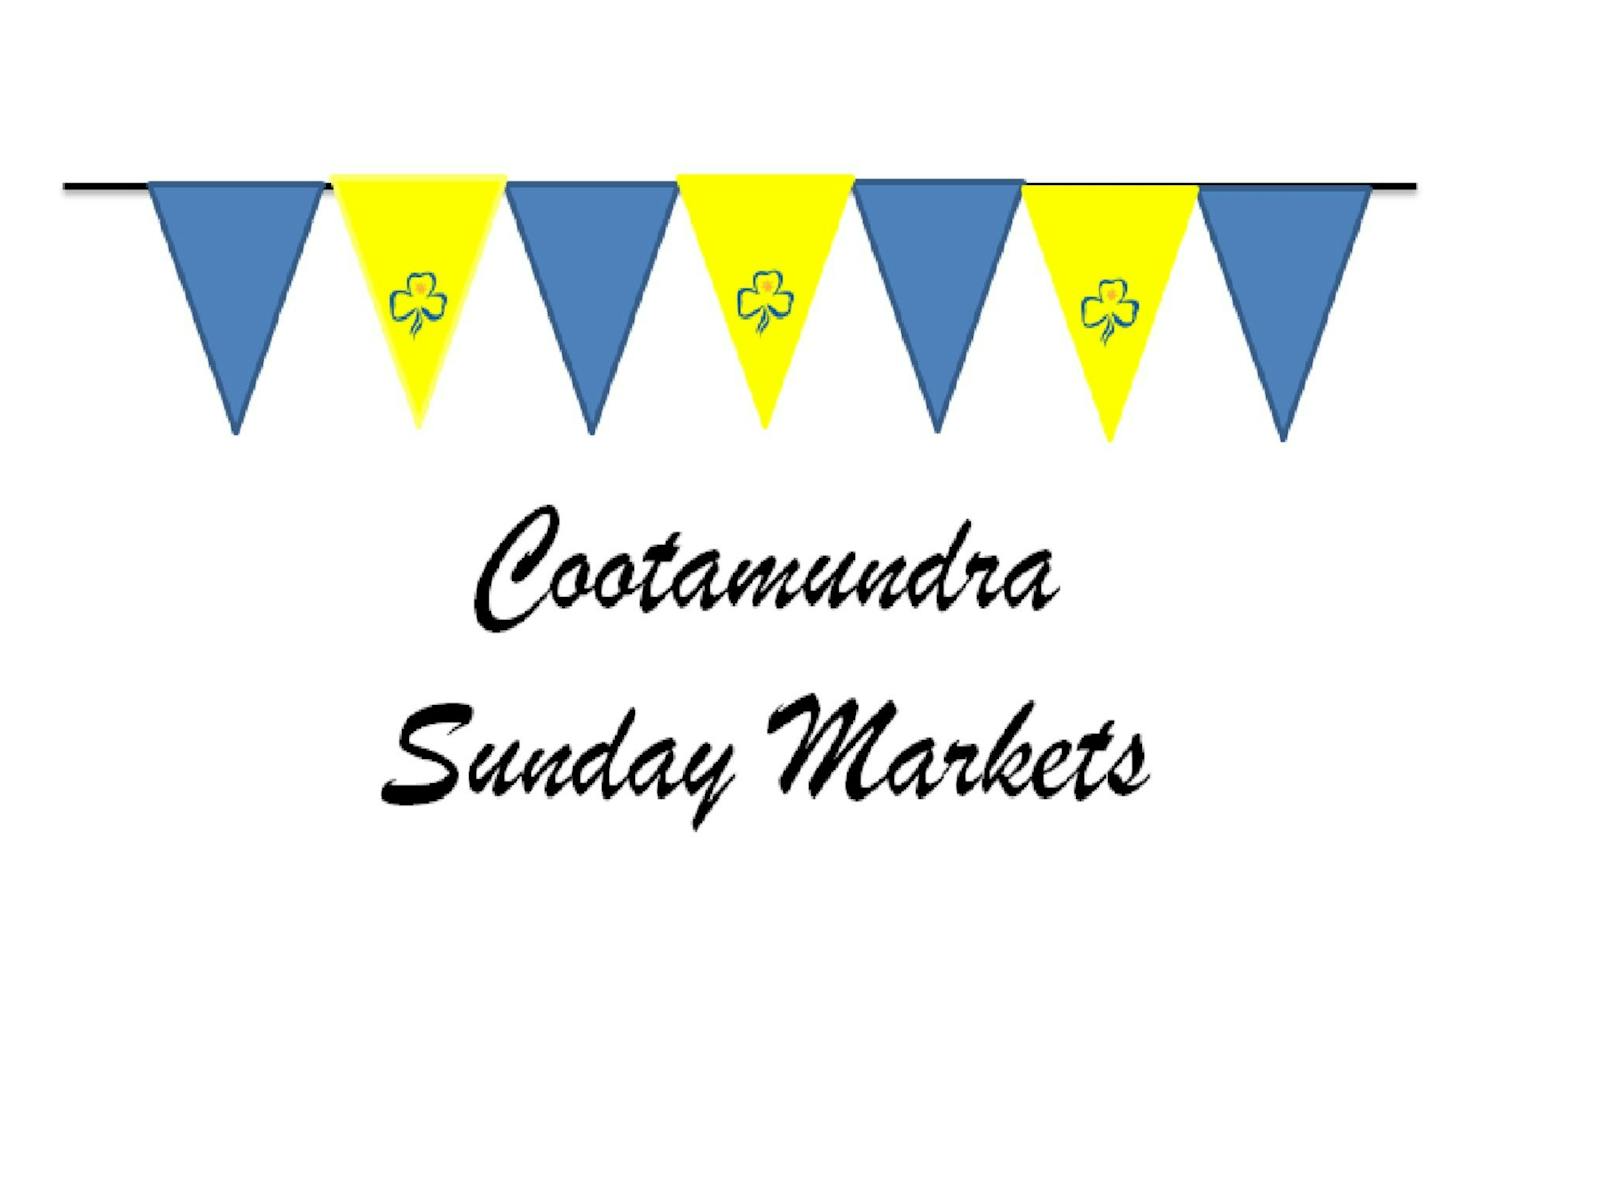 Image for Girl Guides Sunday Markets